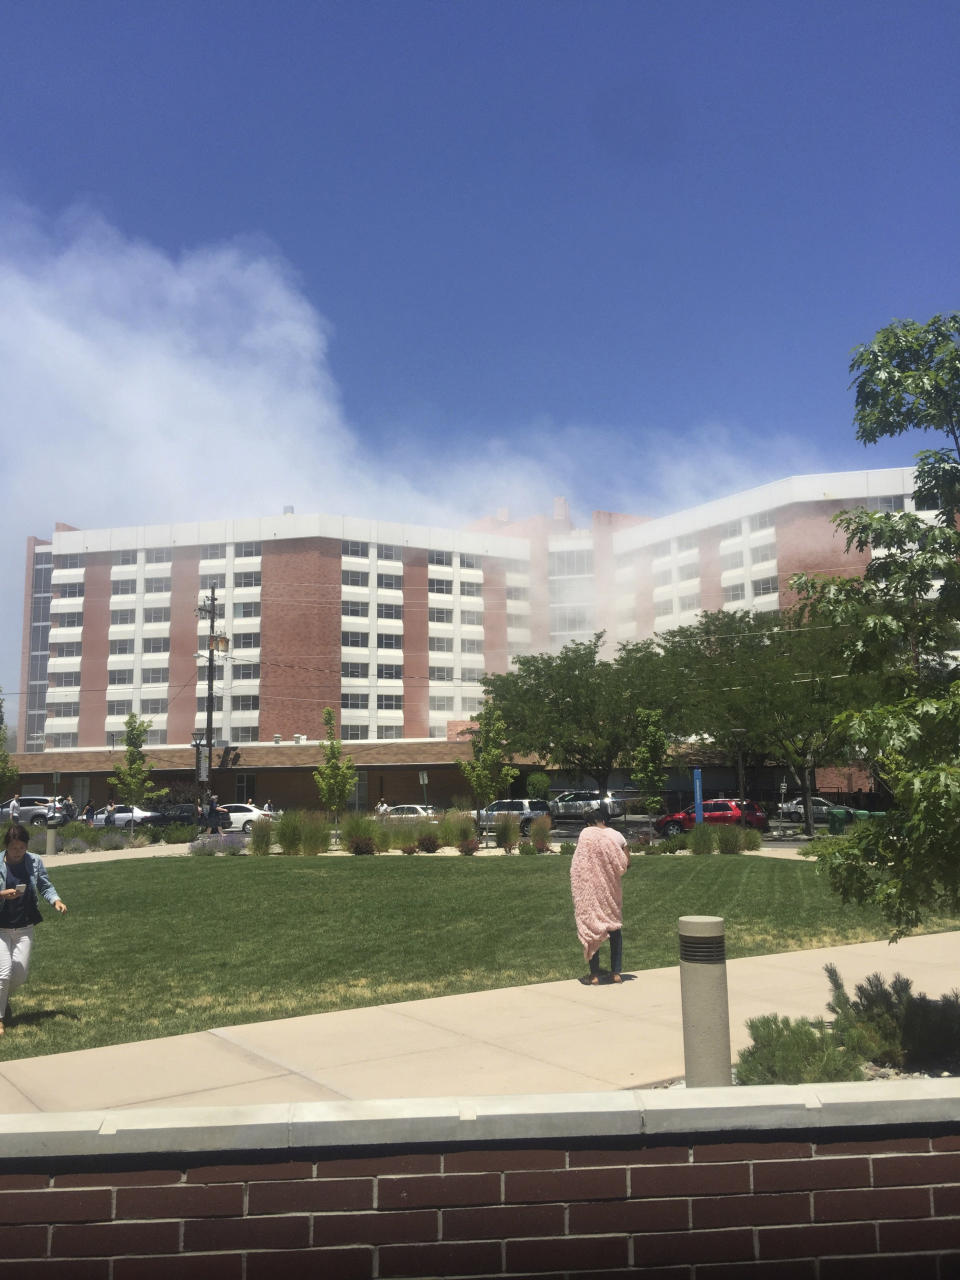 Plumes of smoke from an explosion inside a residence hall at the University of Nevada, Reno in Reno, Nev., is visible on Friday, July 5, 2019. Police referred to the incident as a "utilities accident." There were no immediate reports of injuries. (Raymond Floyd via The AP)